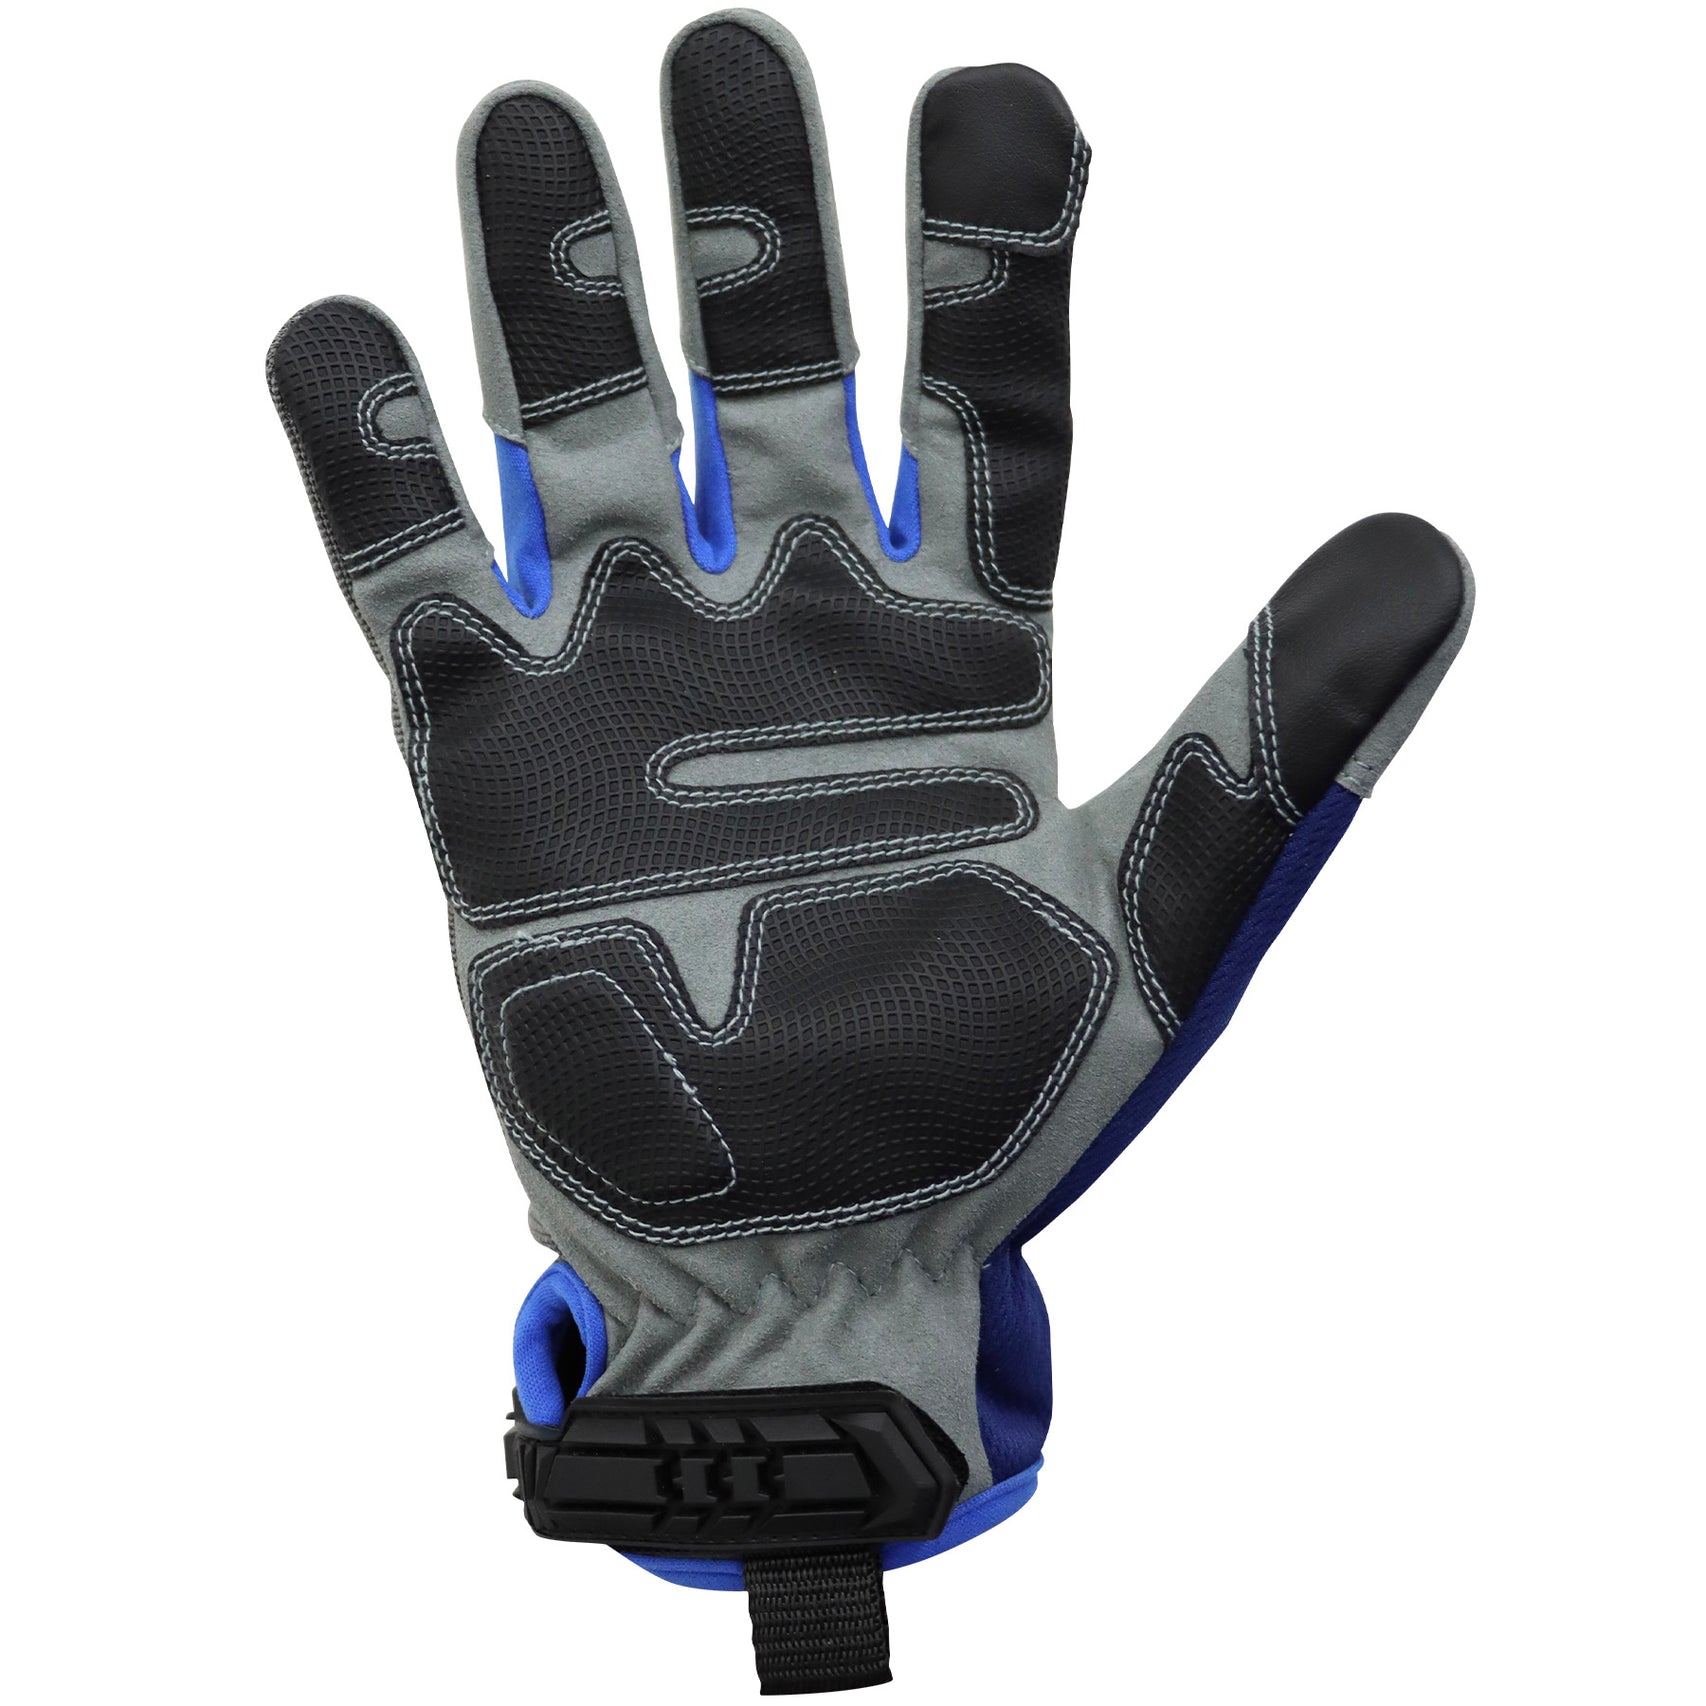 GE PPE  -  #GG411  PRO Mechanics Gloves Hand Protection w/Velcro Cuff  - Impact Resistant Gloves